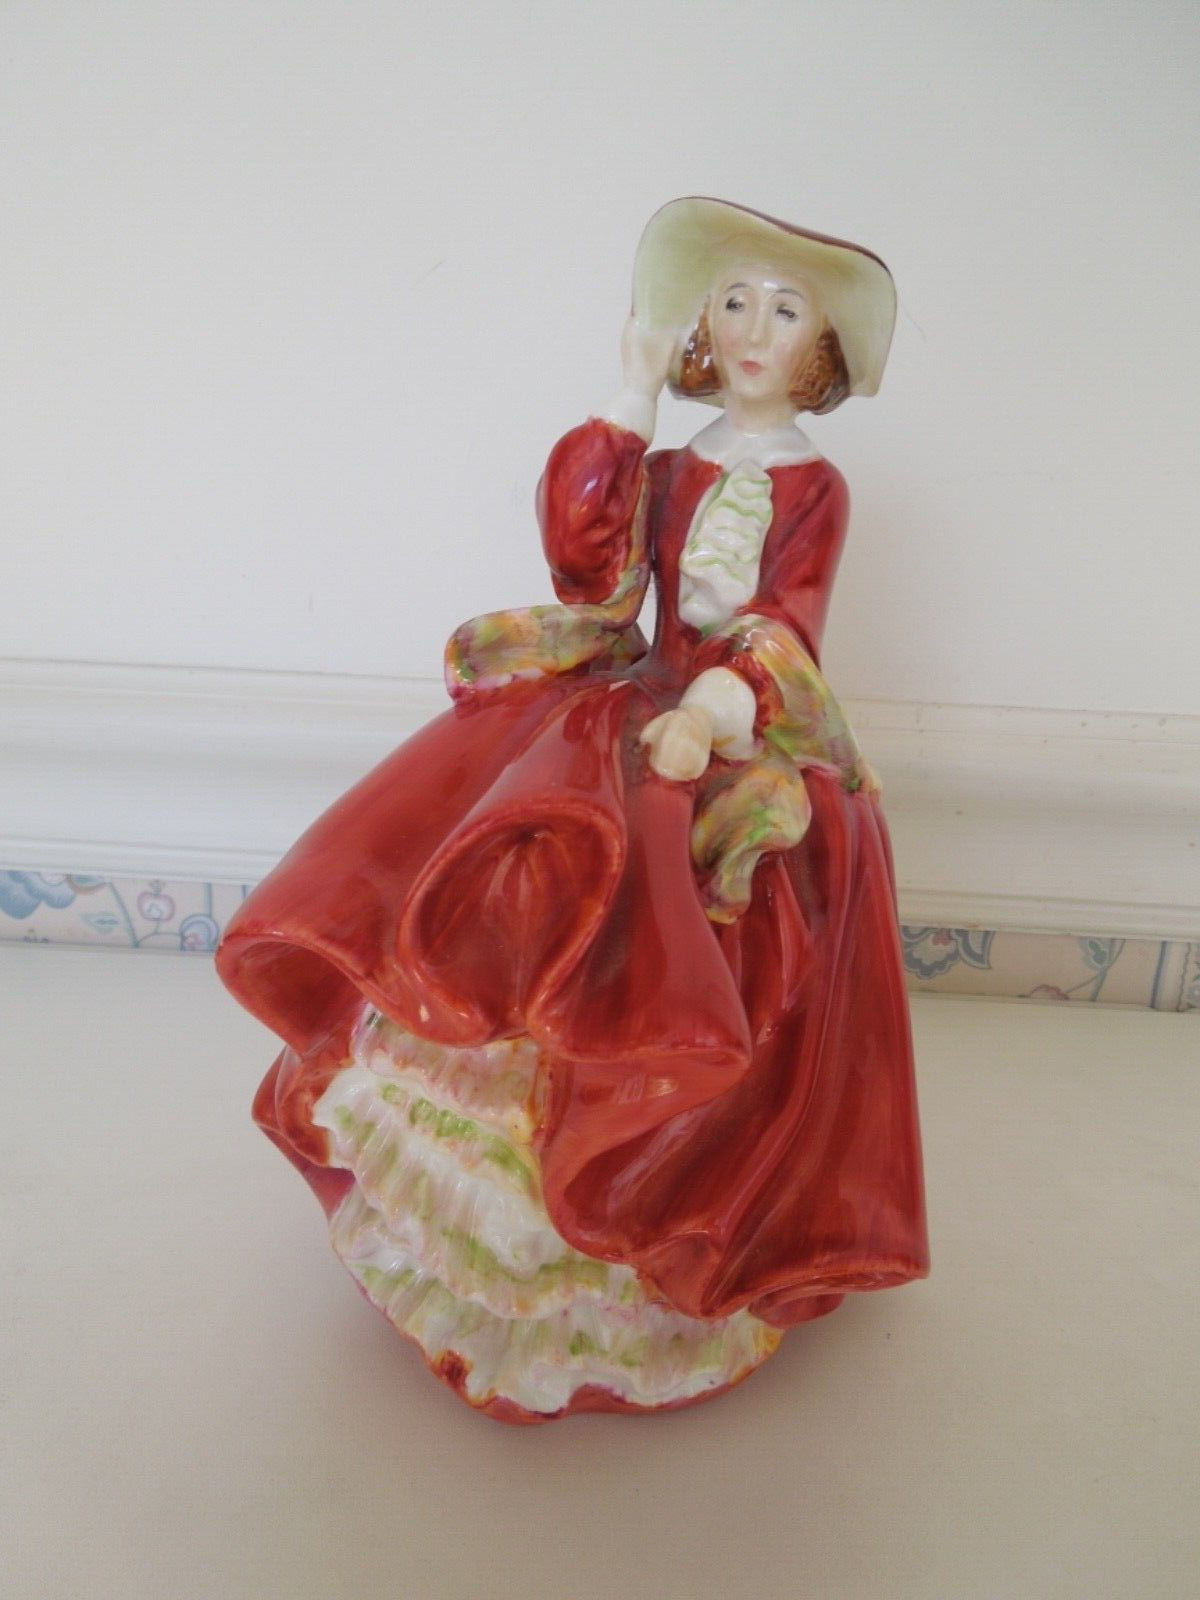 Royal Doulton figurine Top O The Hill HN1834 signed by Michael Doulton 1980 Mint